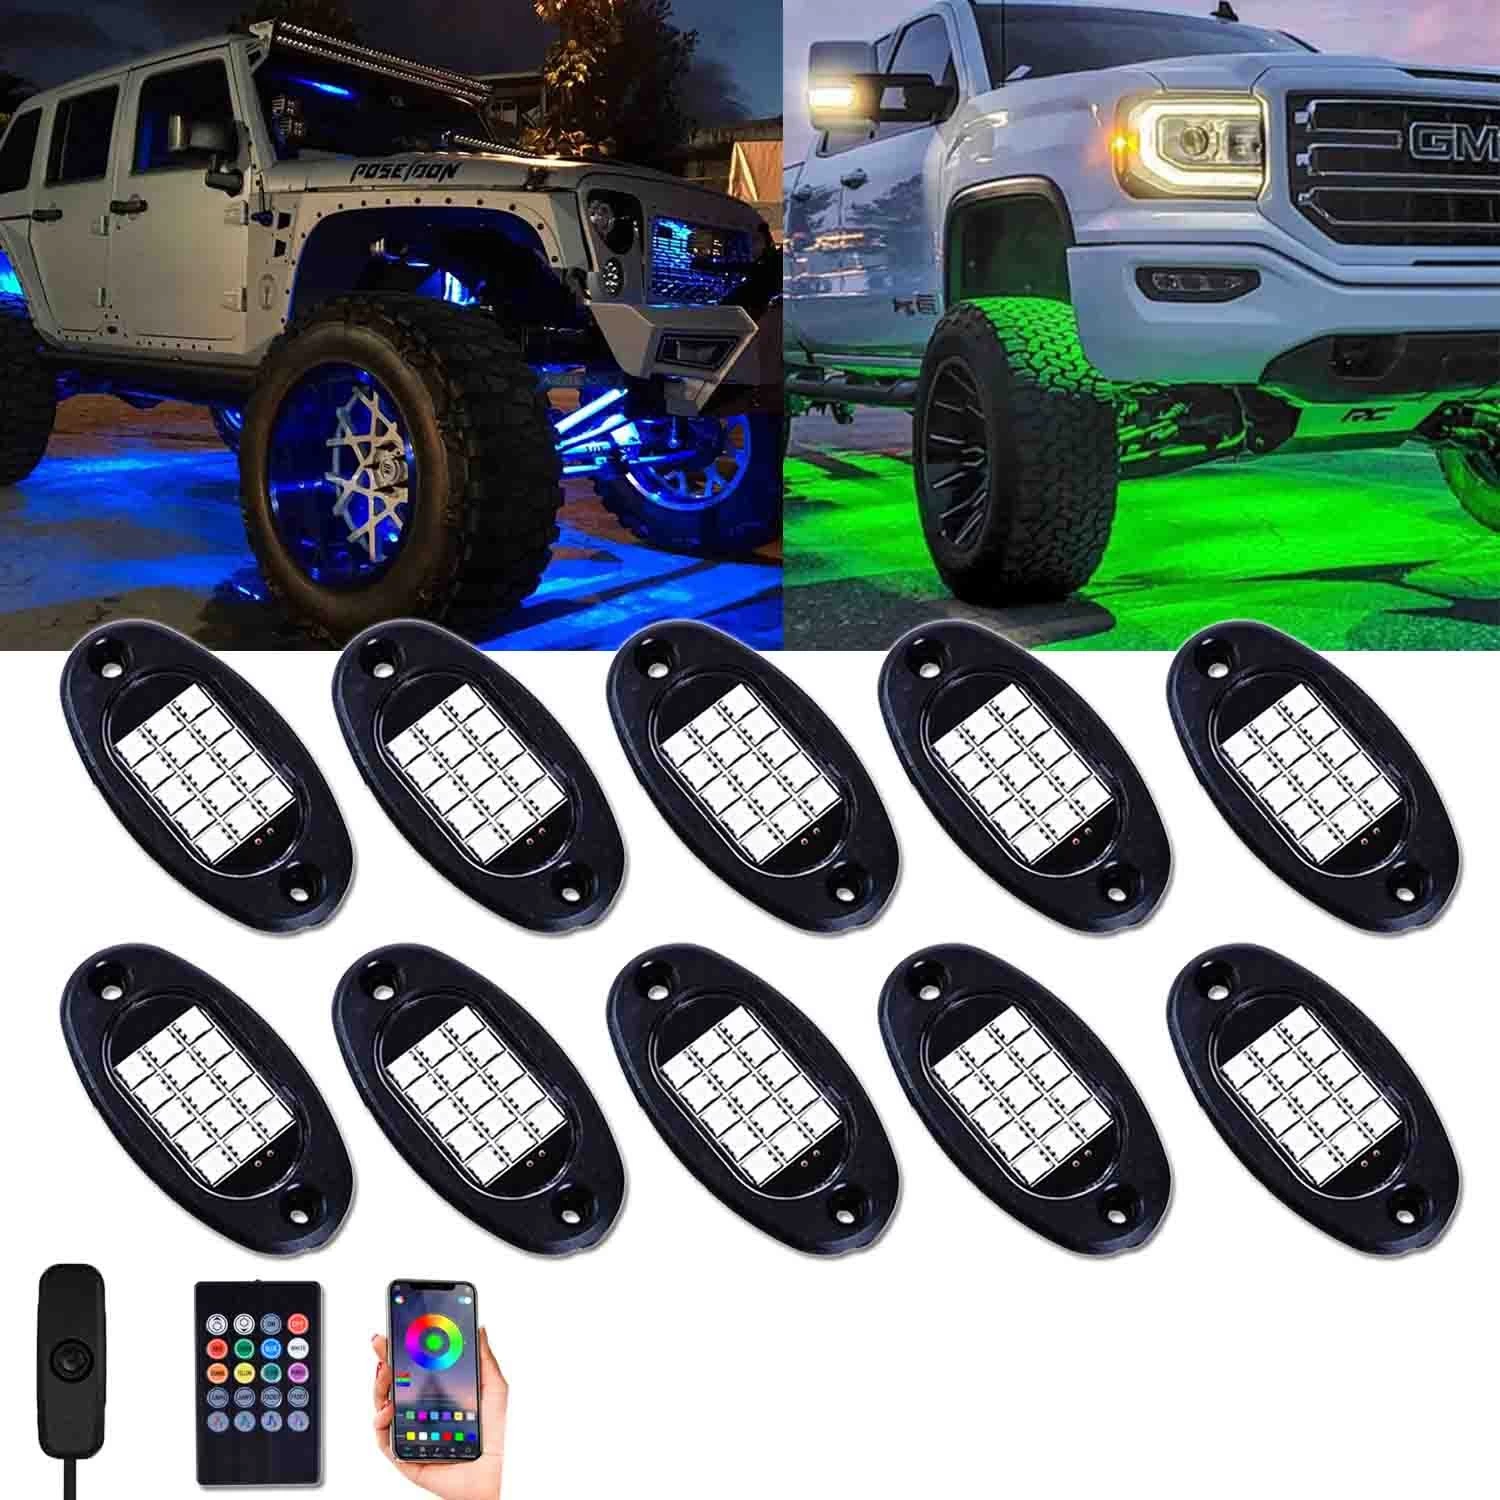 Unionlux RGB LED Rock Lights 60 LEDs Multicolor Underglow Neon Lights Waterproof Aluminum Light Kit with RF/APP Control Music Mode Timing Function for Truck Jeep Off Road Car UTV ATV SUV 8 Packs